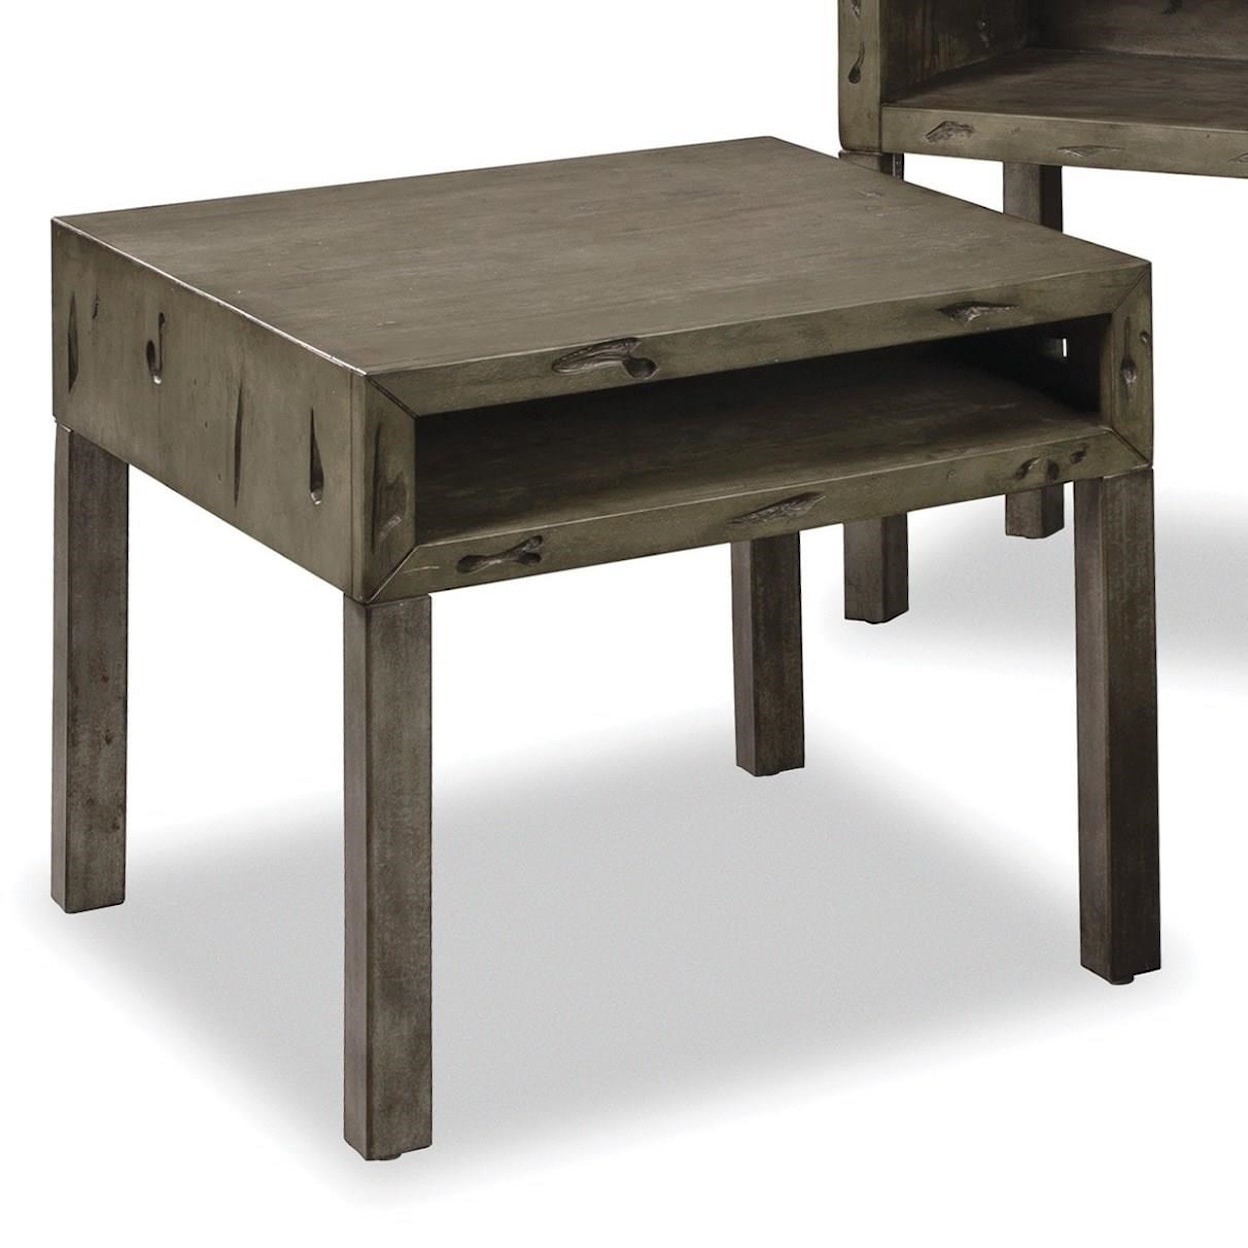 Craftmaster 991 Tables End Table